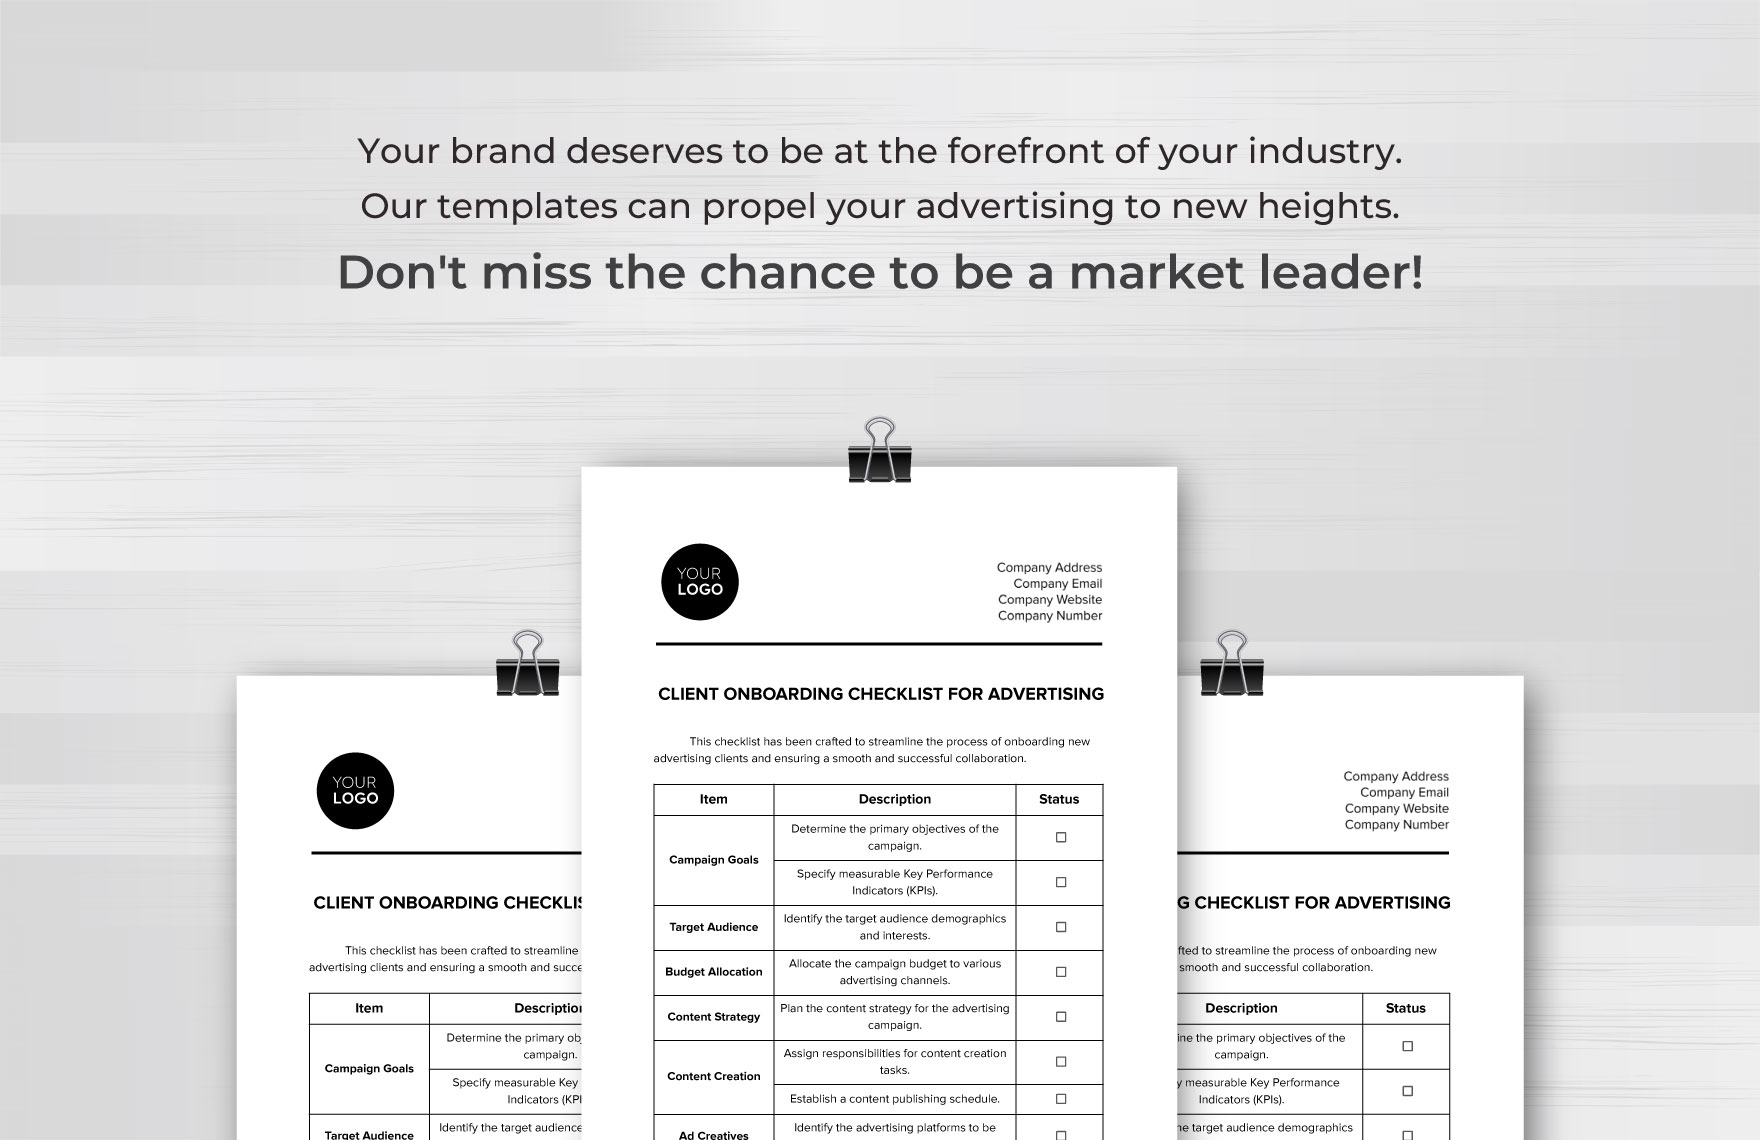 Client Onboarding Checklist for Advertising Template